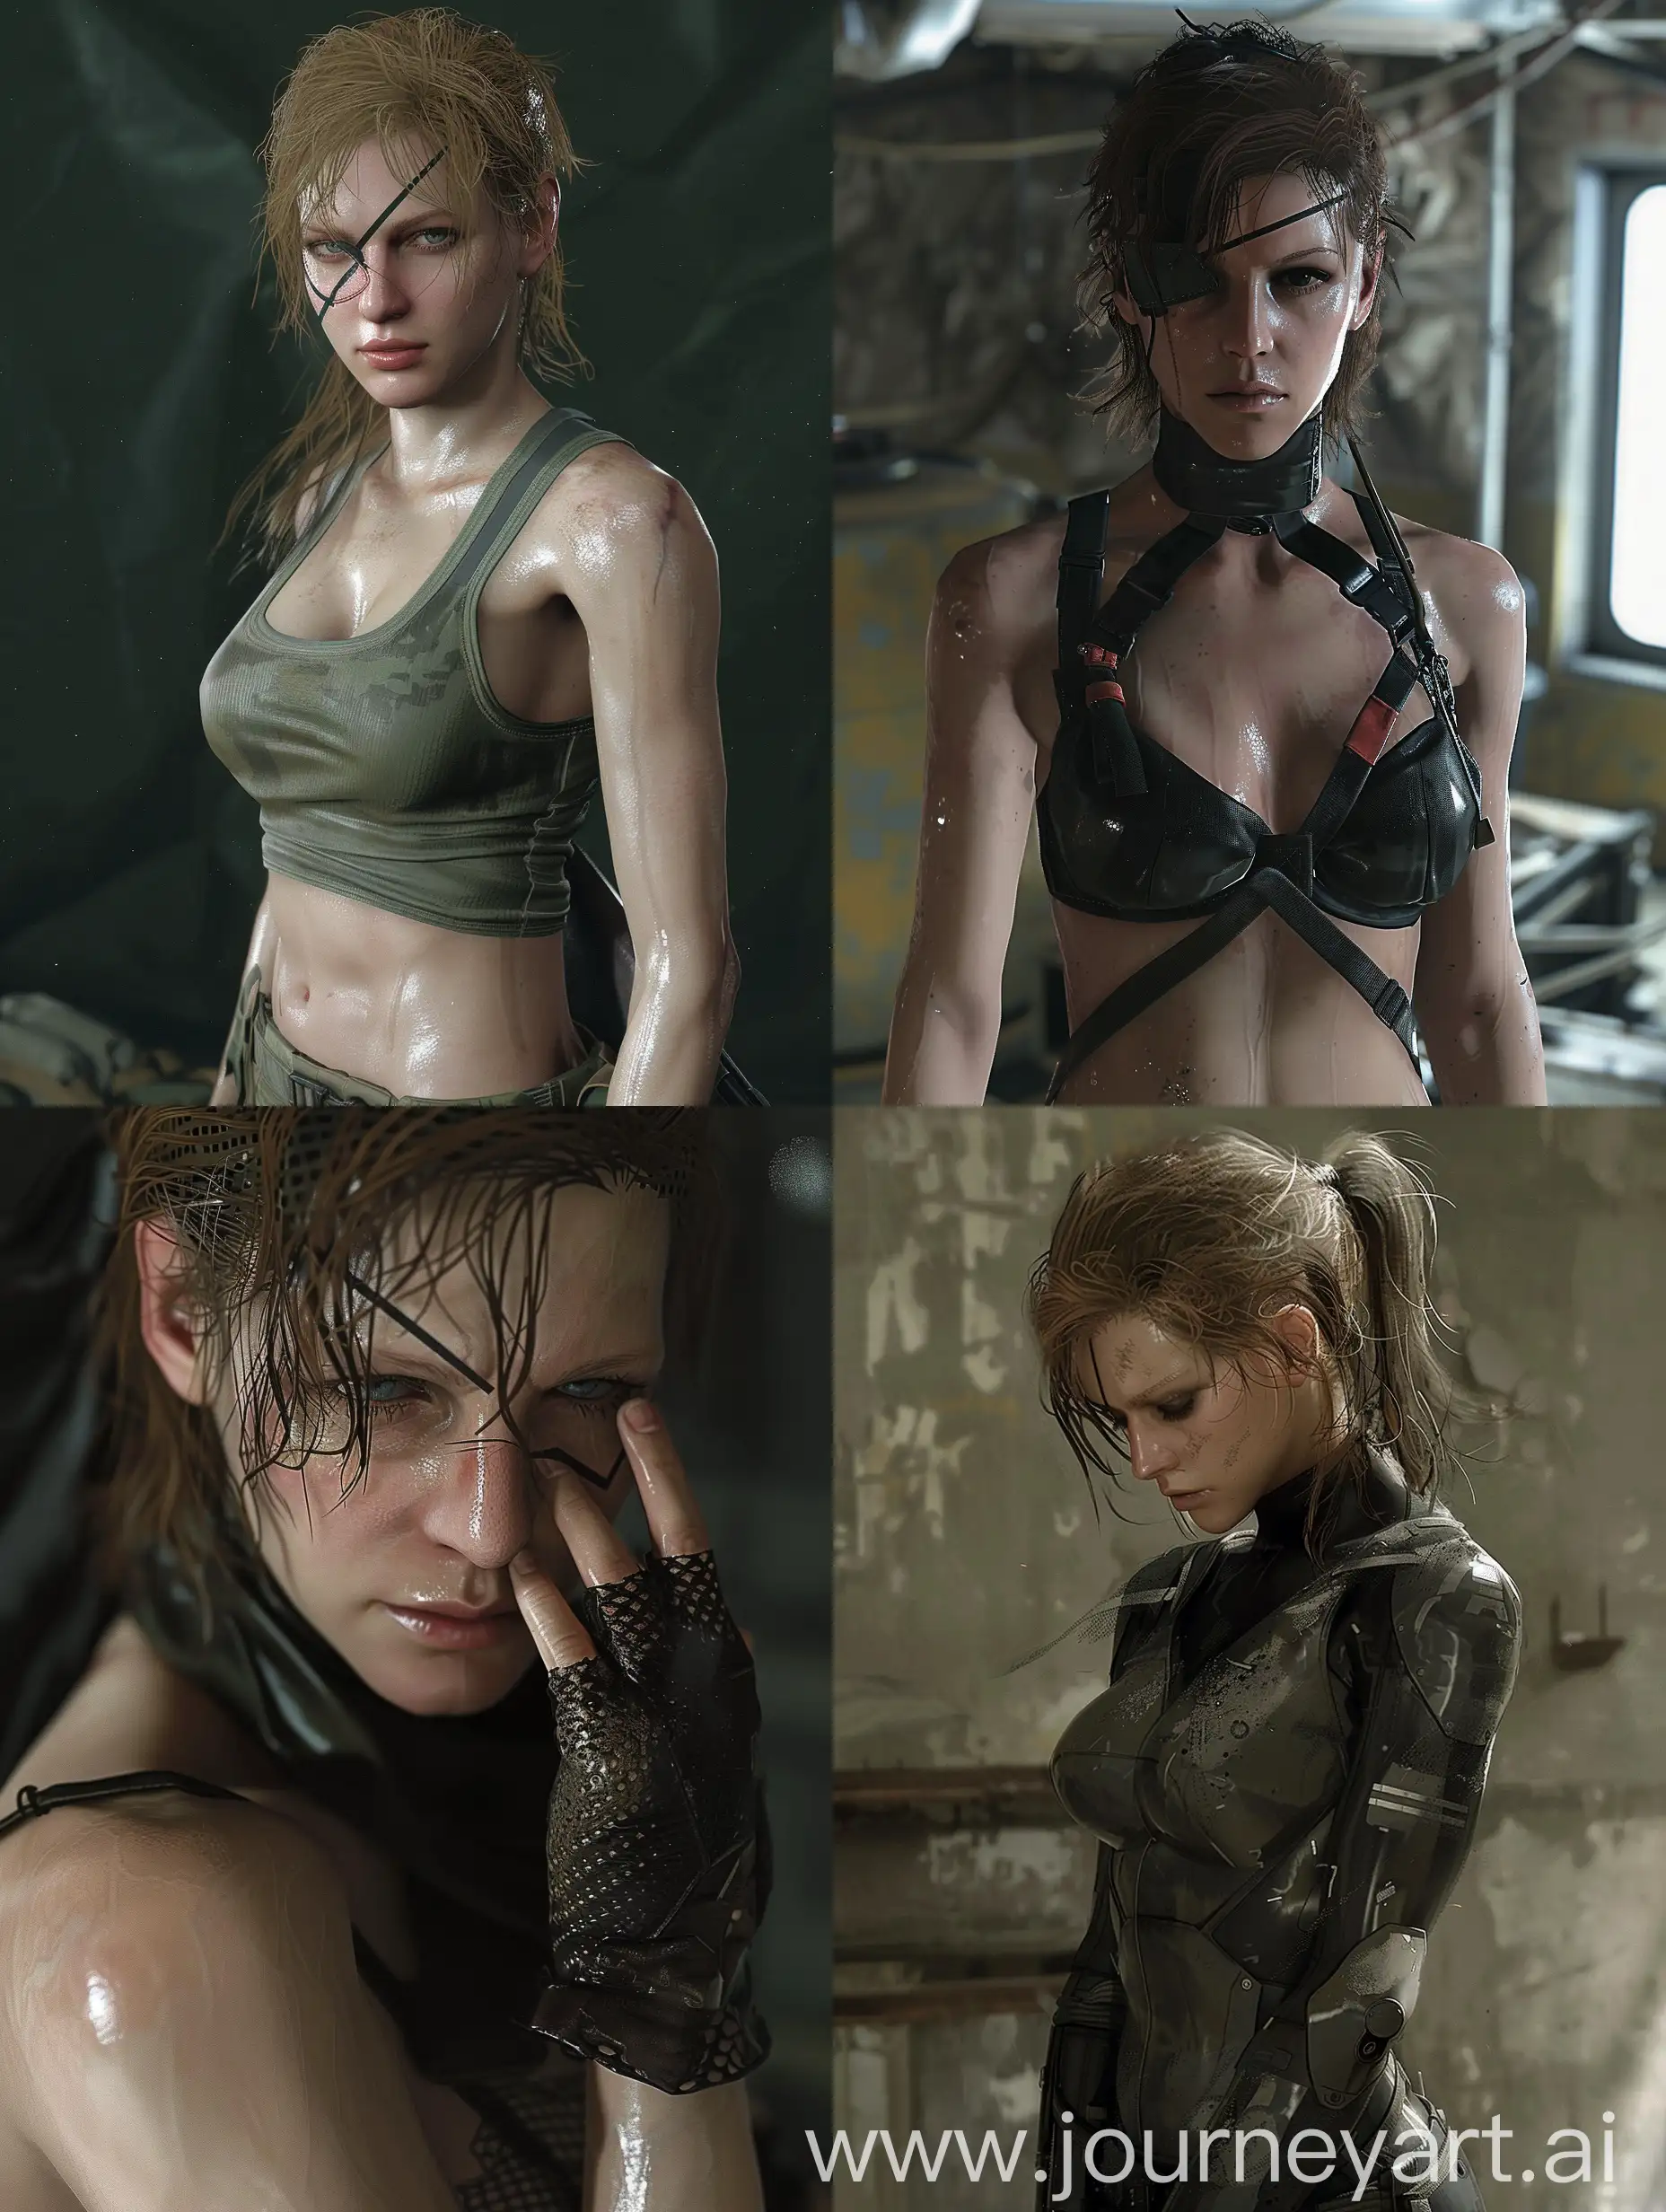 Silent woman from the game " Metal Gear Solid 5: The Phantom Pain"